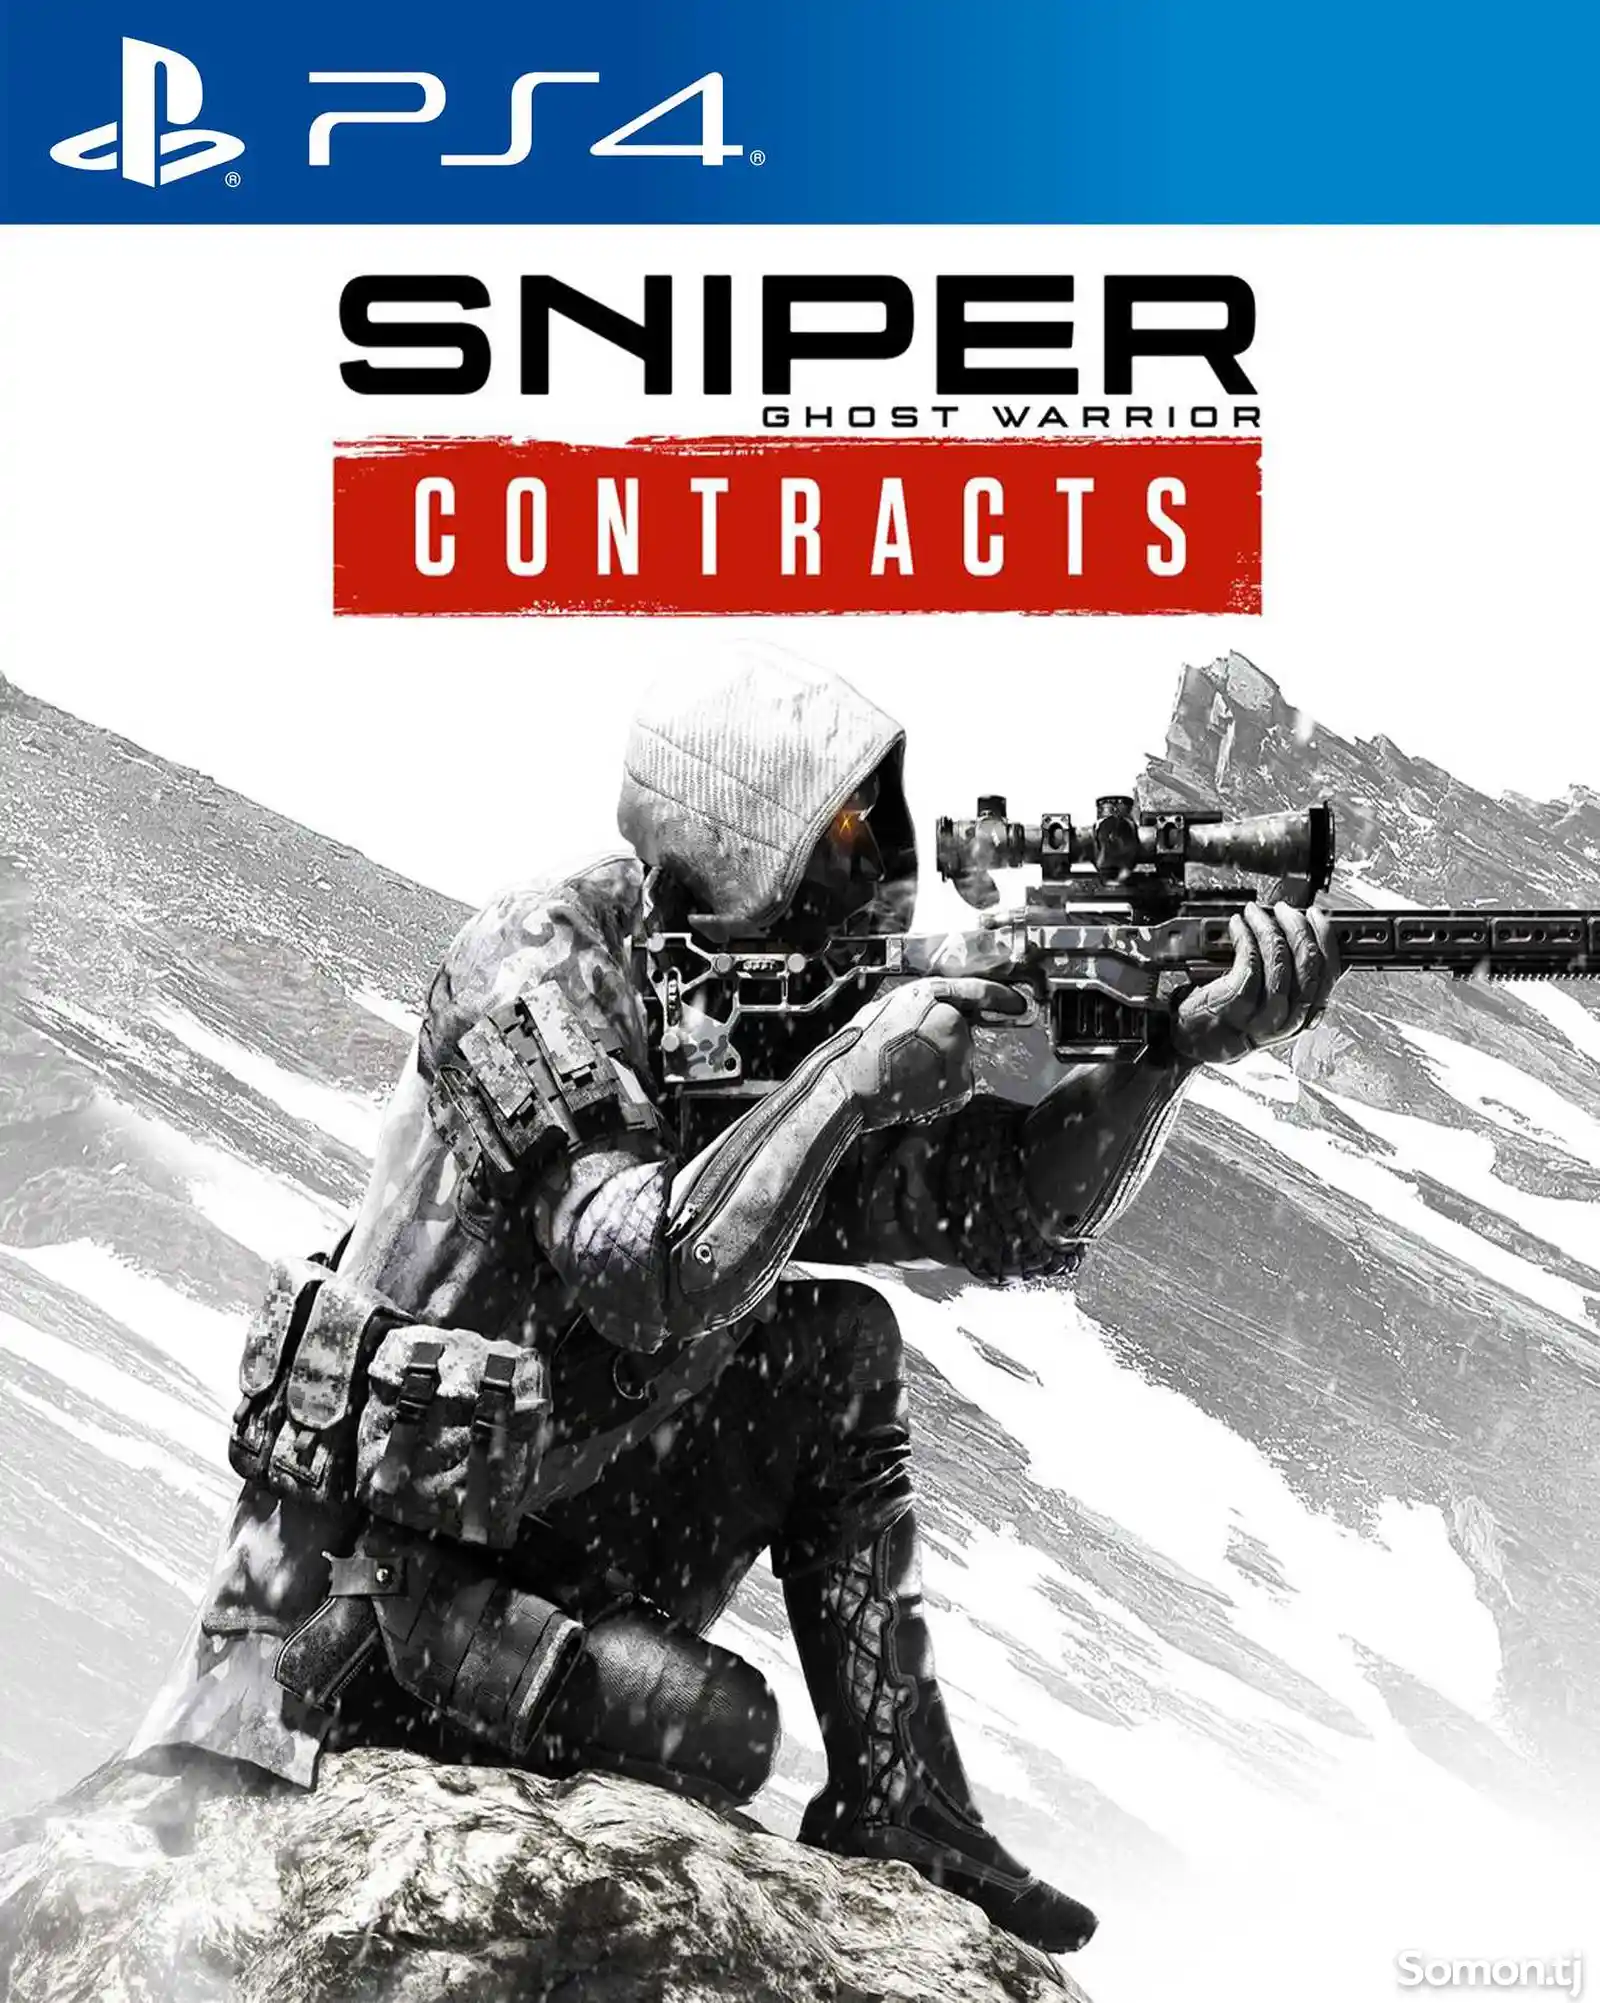 Игра Sniper ghost warrior contracts 1 для PS-4 / 5.05 / 6.72 / 7.02 / 9.00 /-1